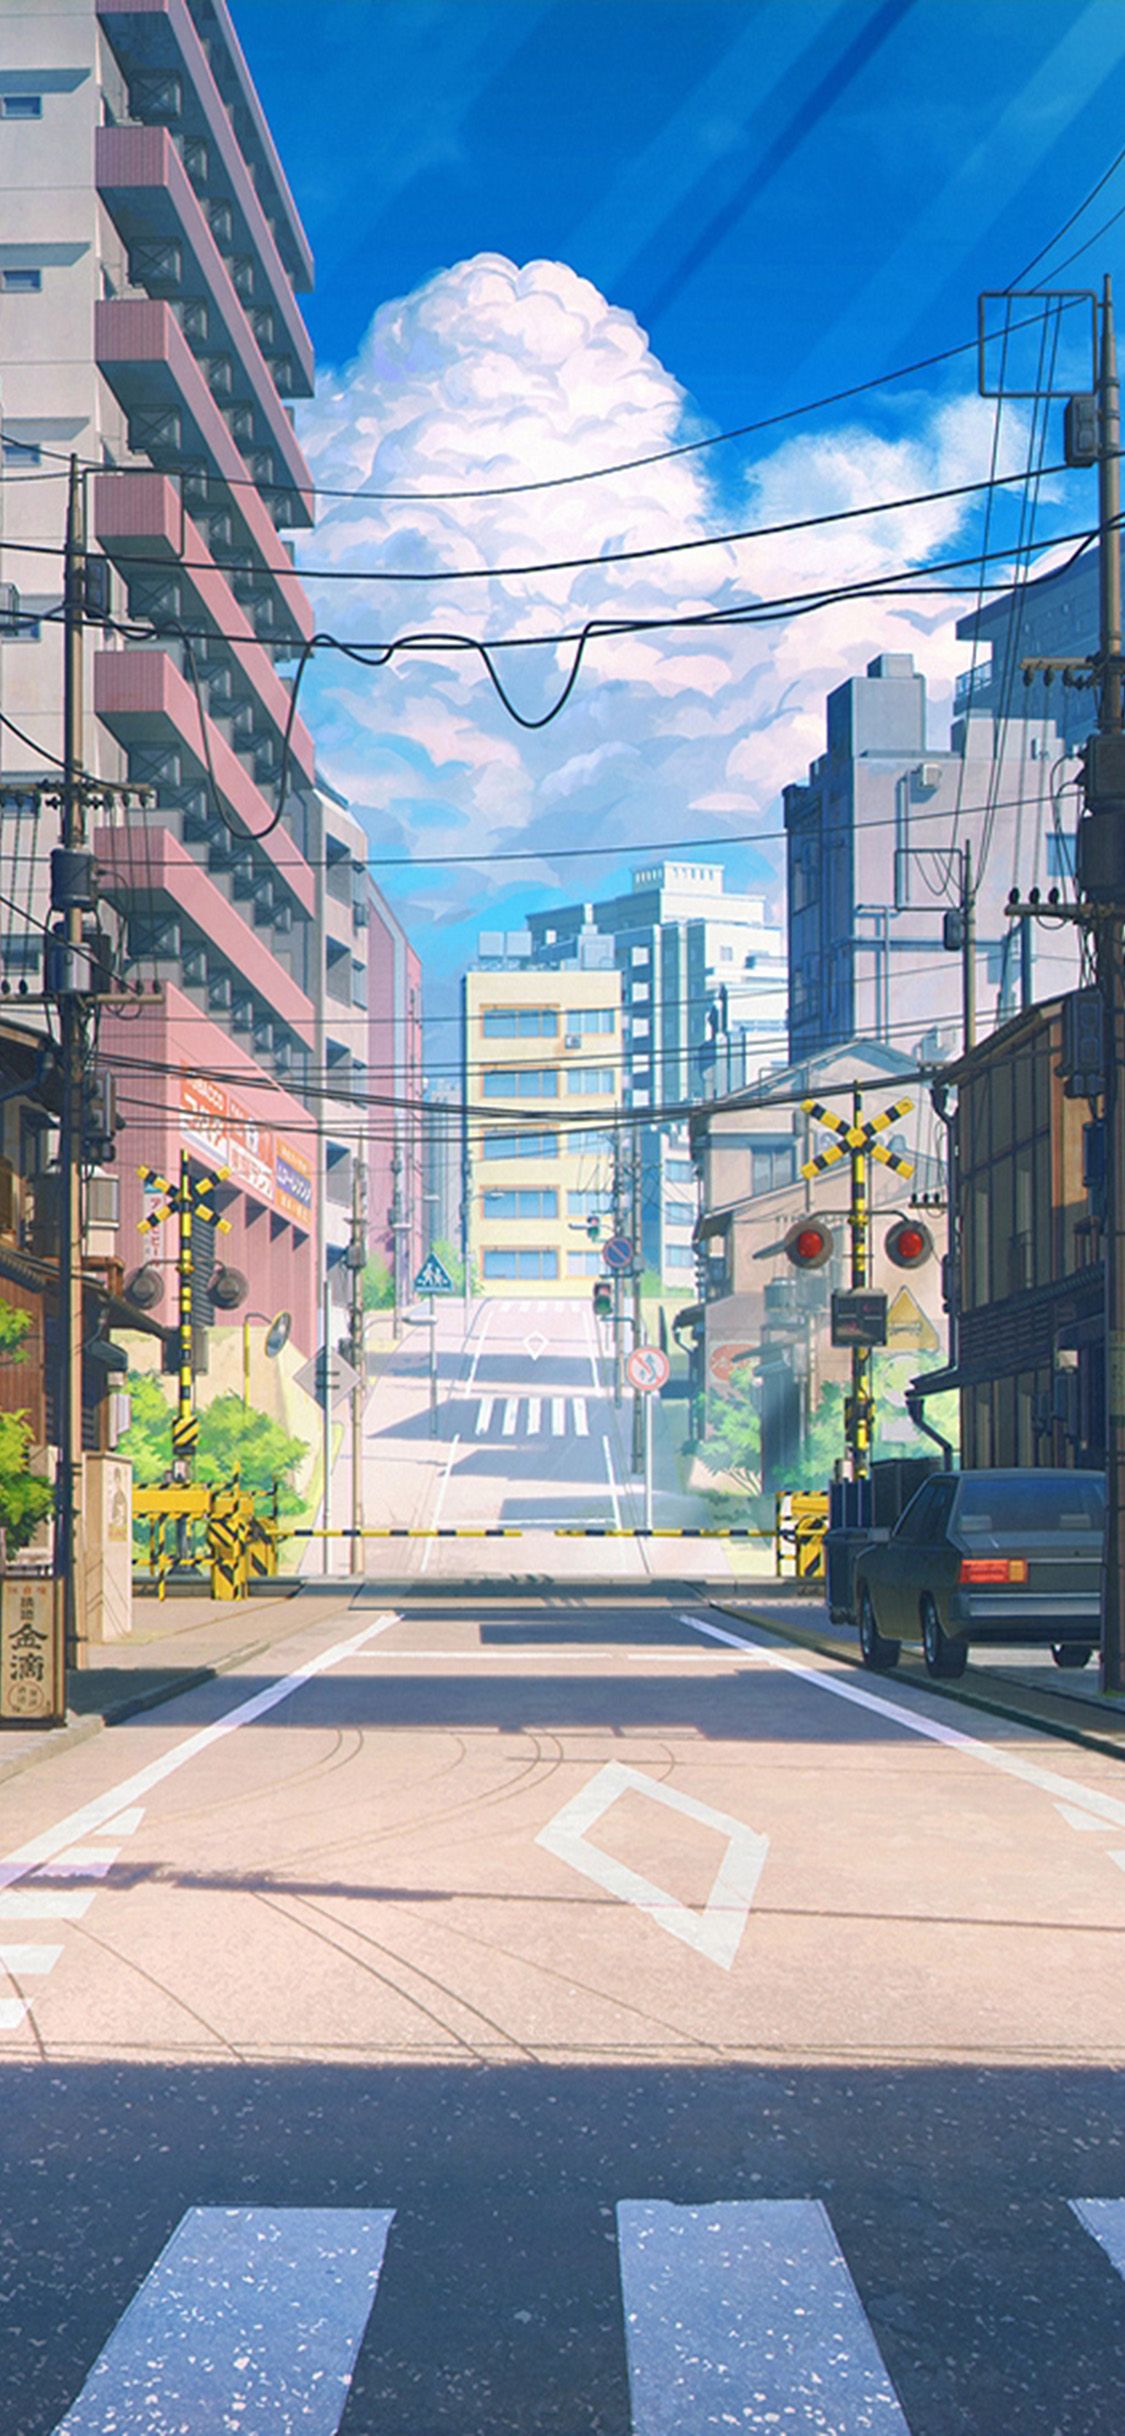 A street with cars and buildings in the background - Anime, Japan, road